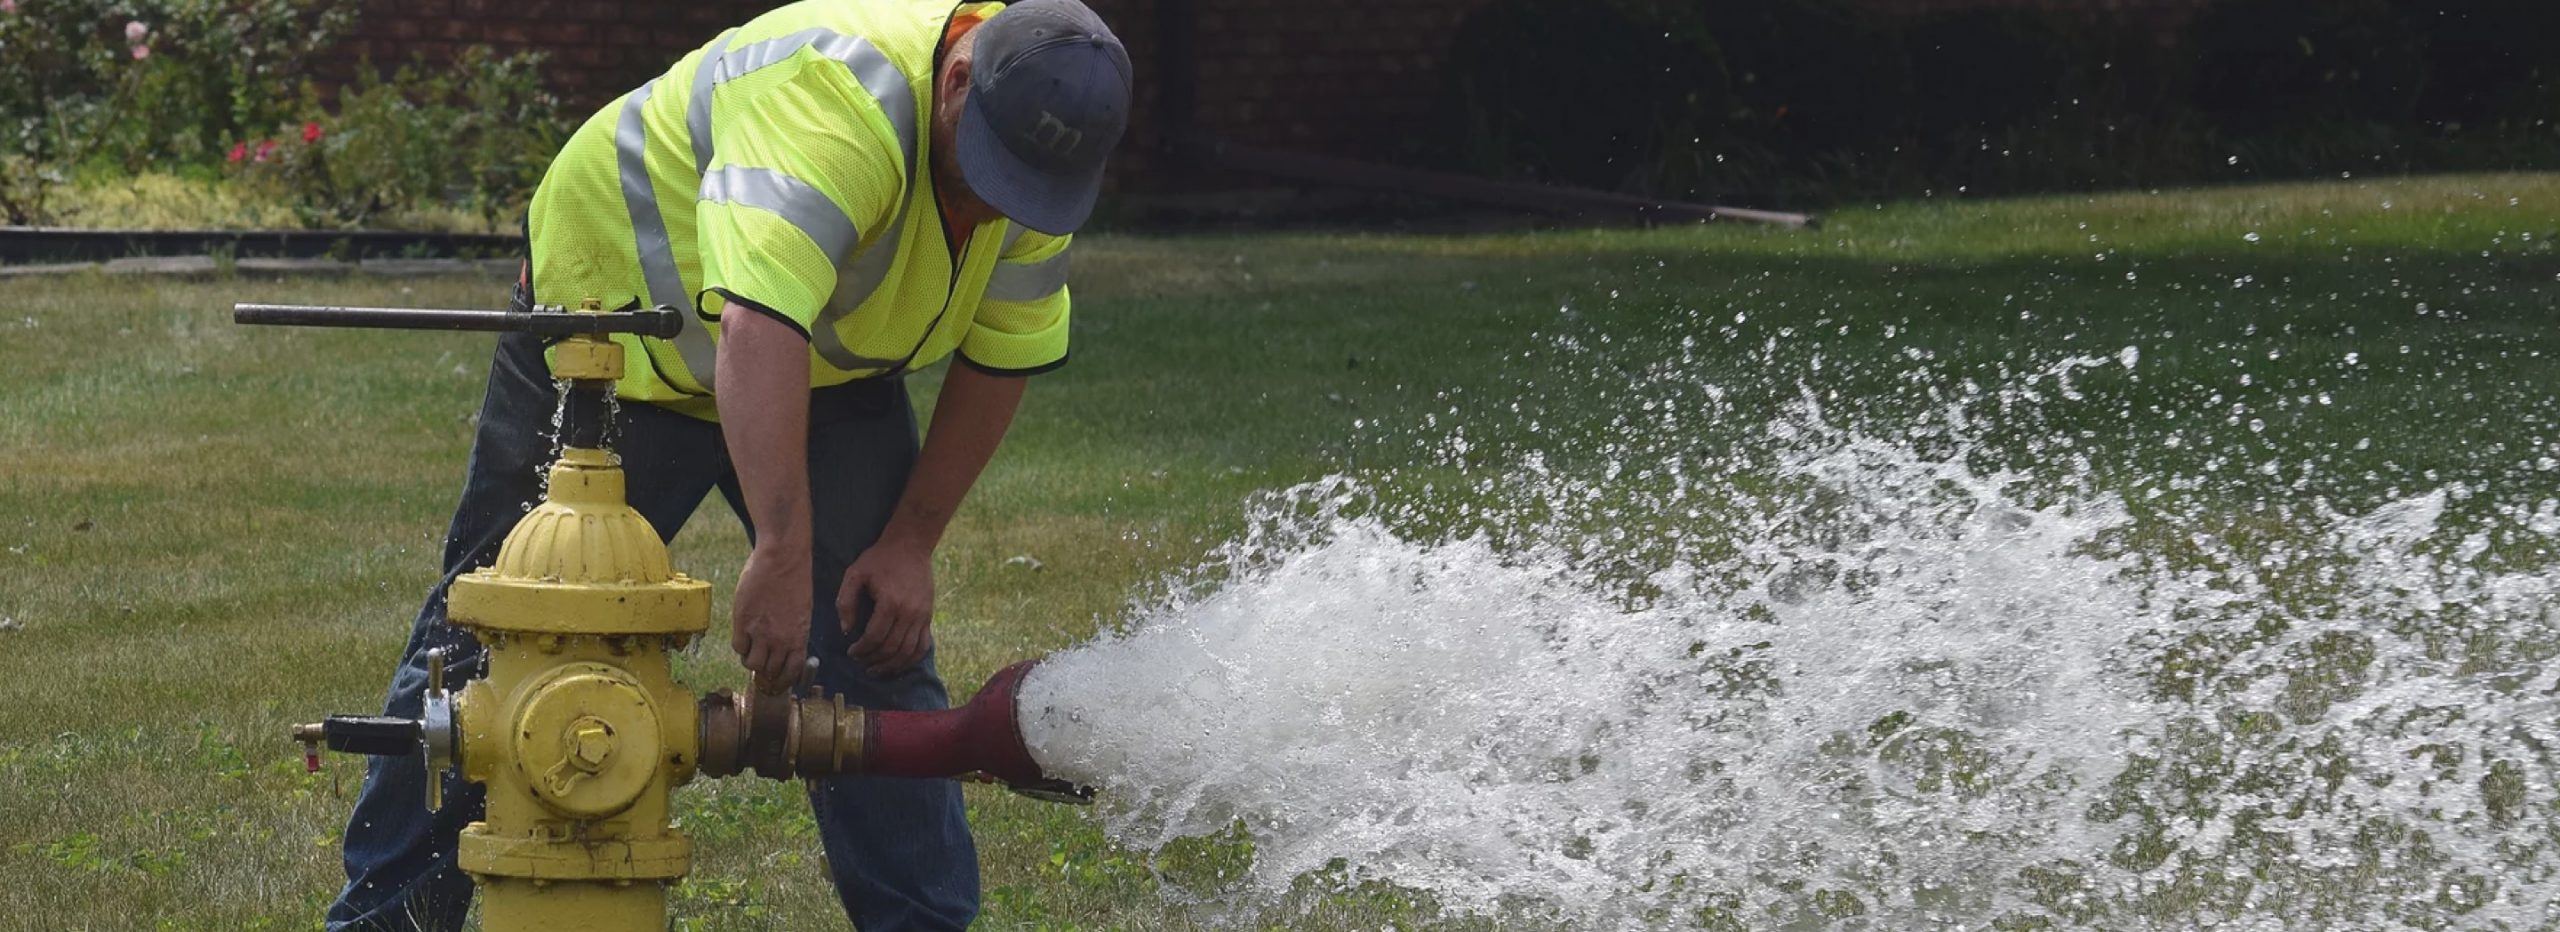 ME Simpson has years of experience providing companies with water management systems for fire hydrants.